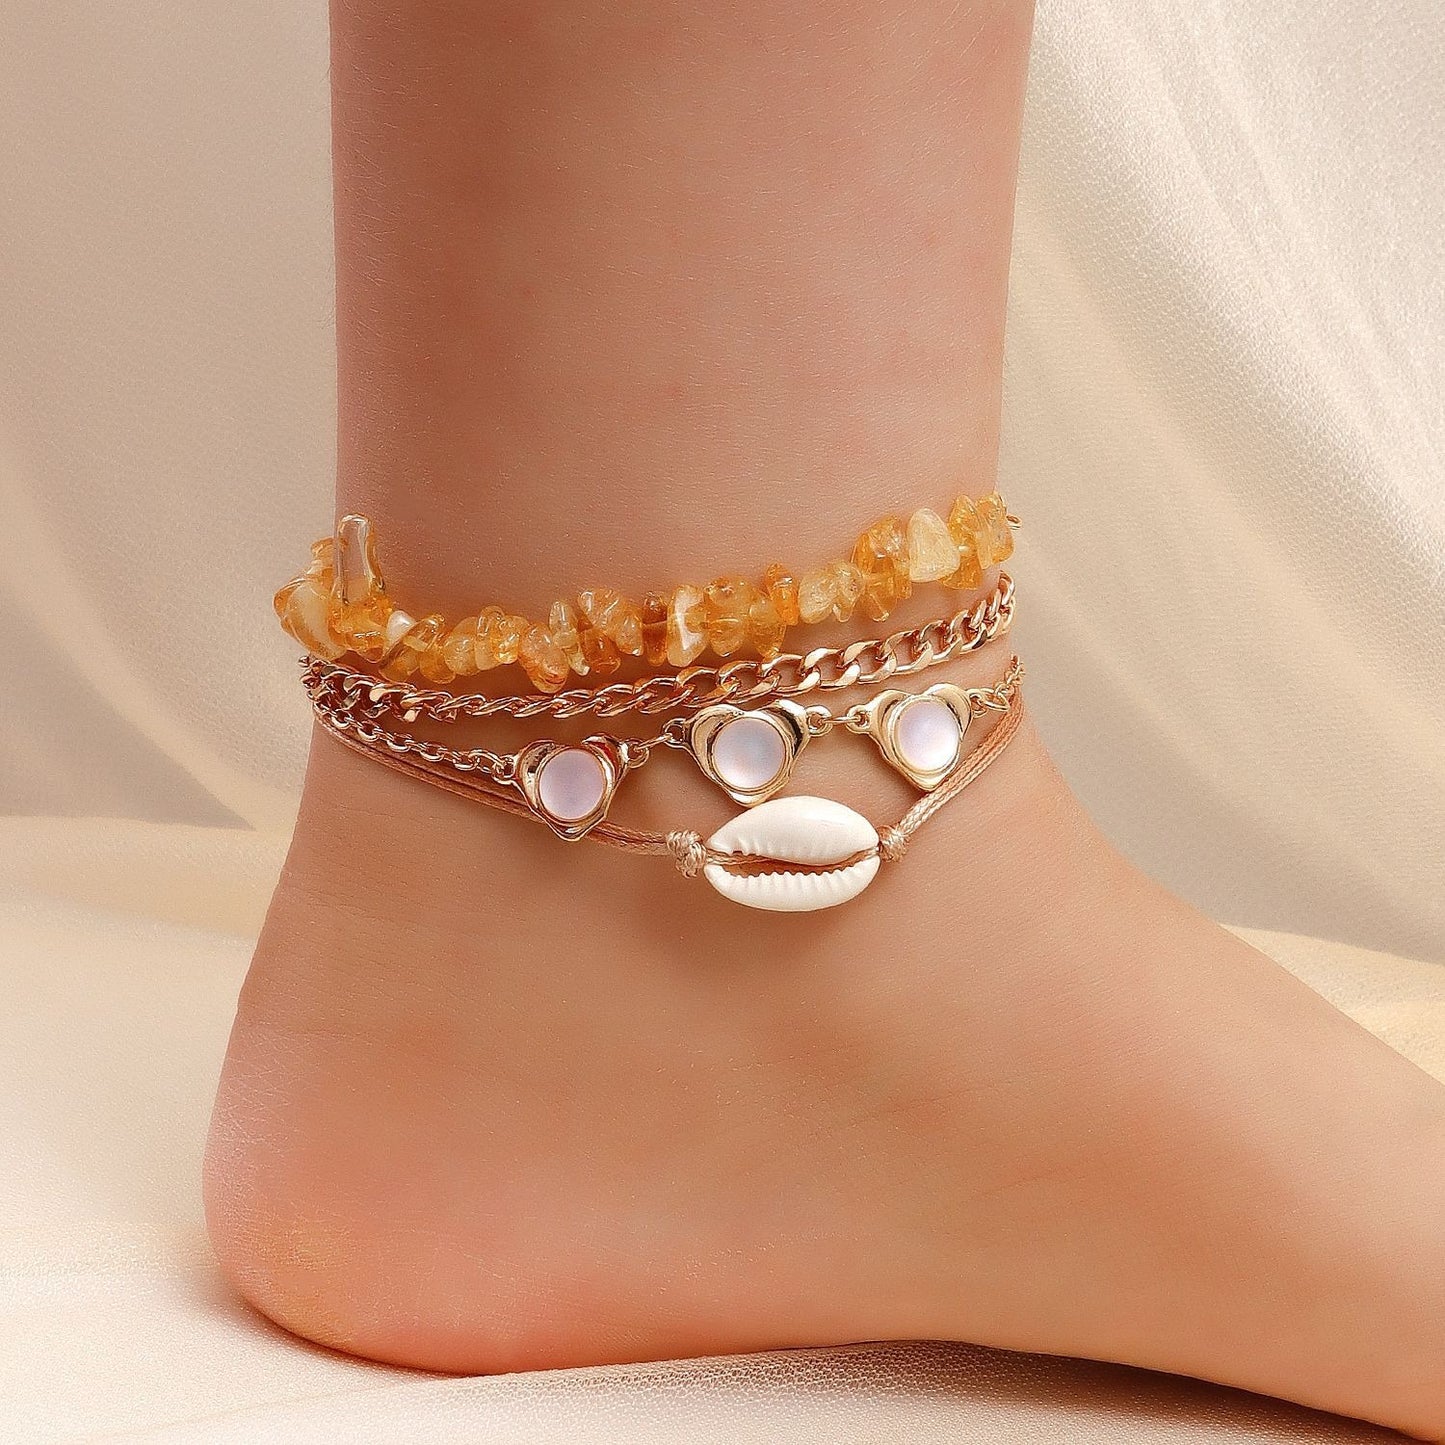 Vintage  Bohemian Eclectic Anklet in Shell and Natural Stones